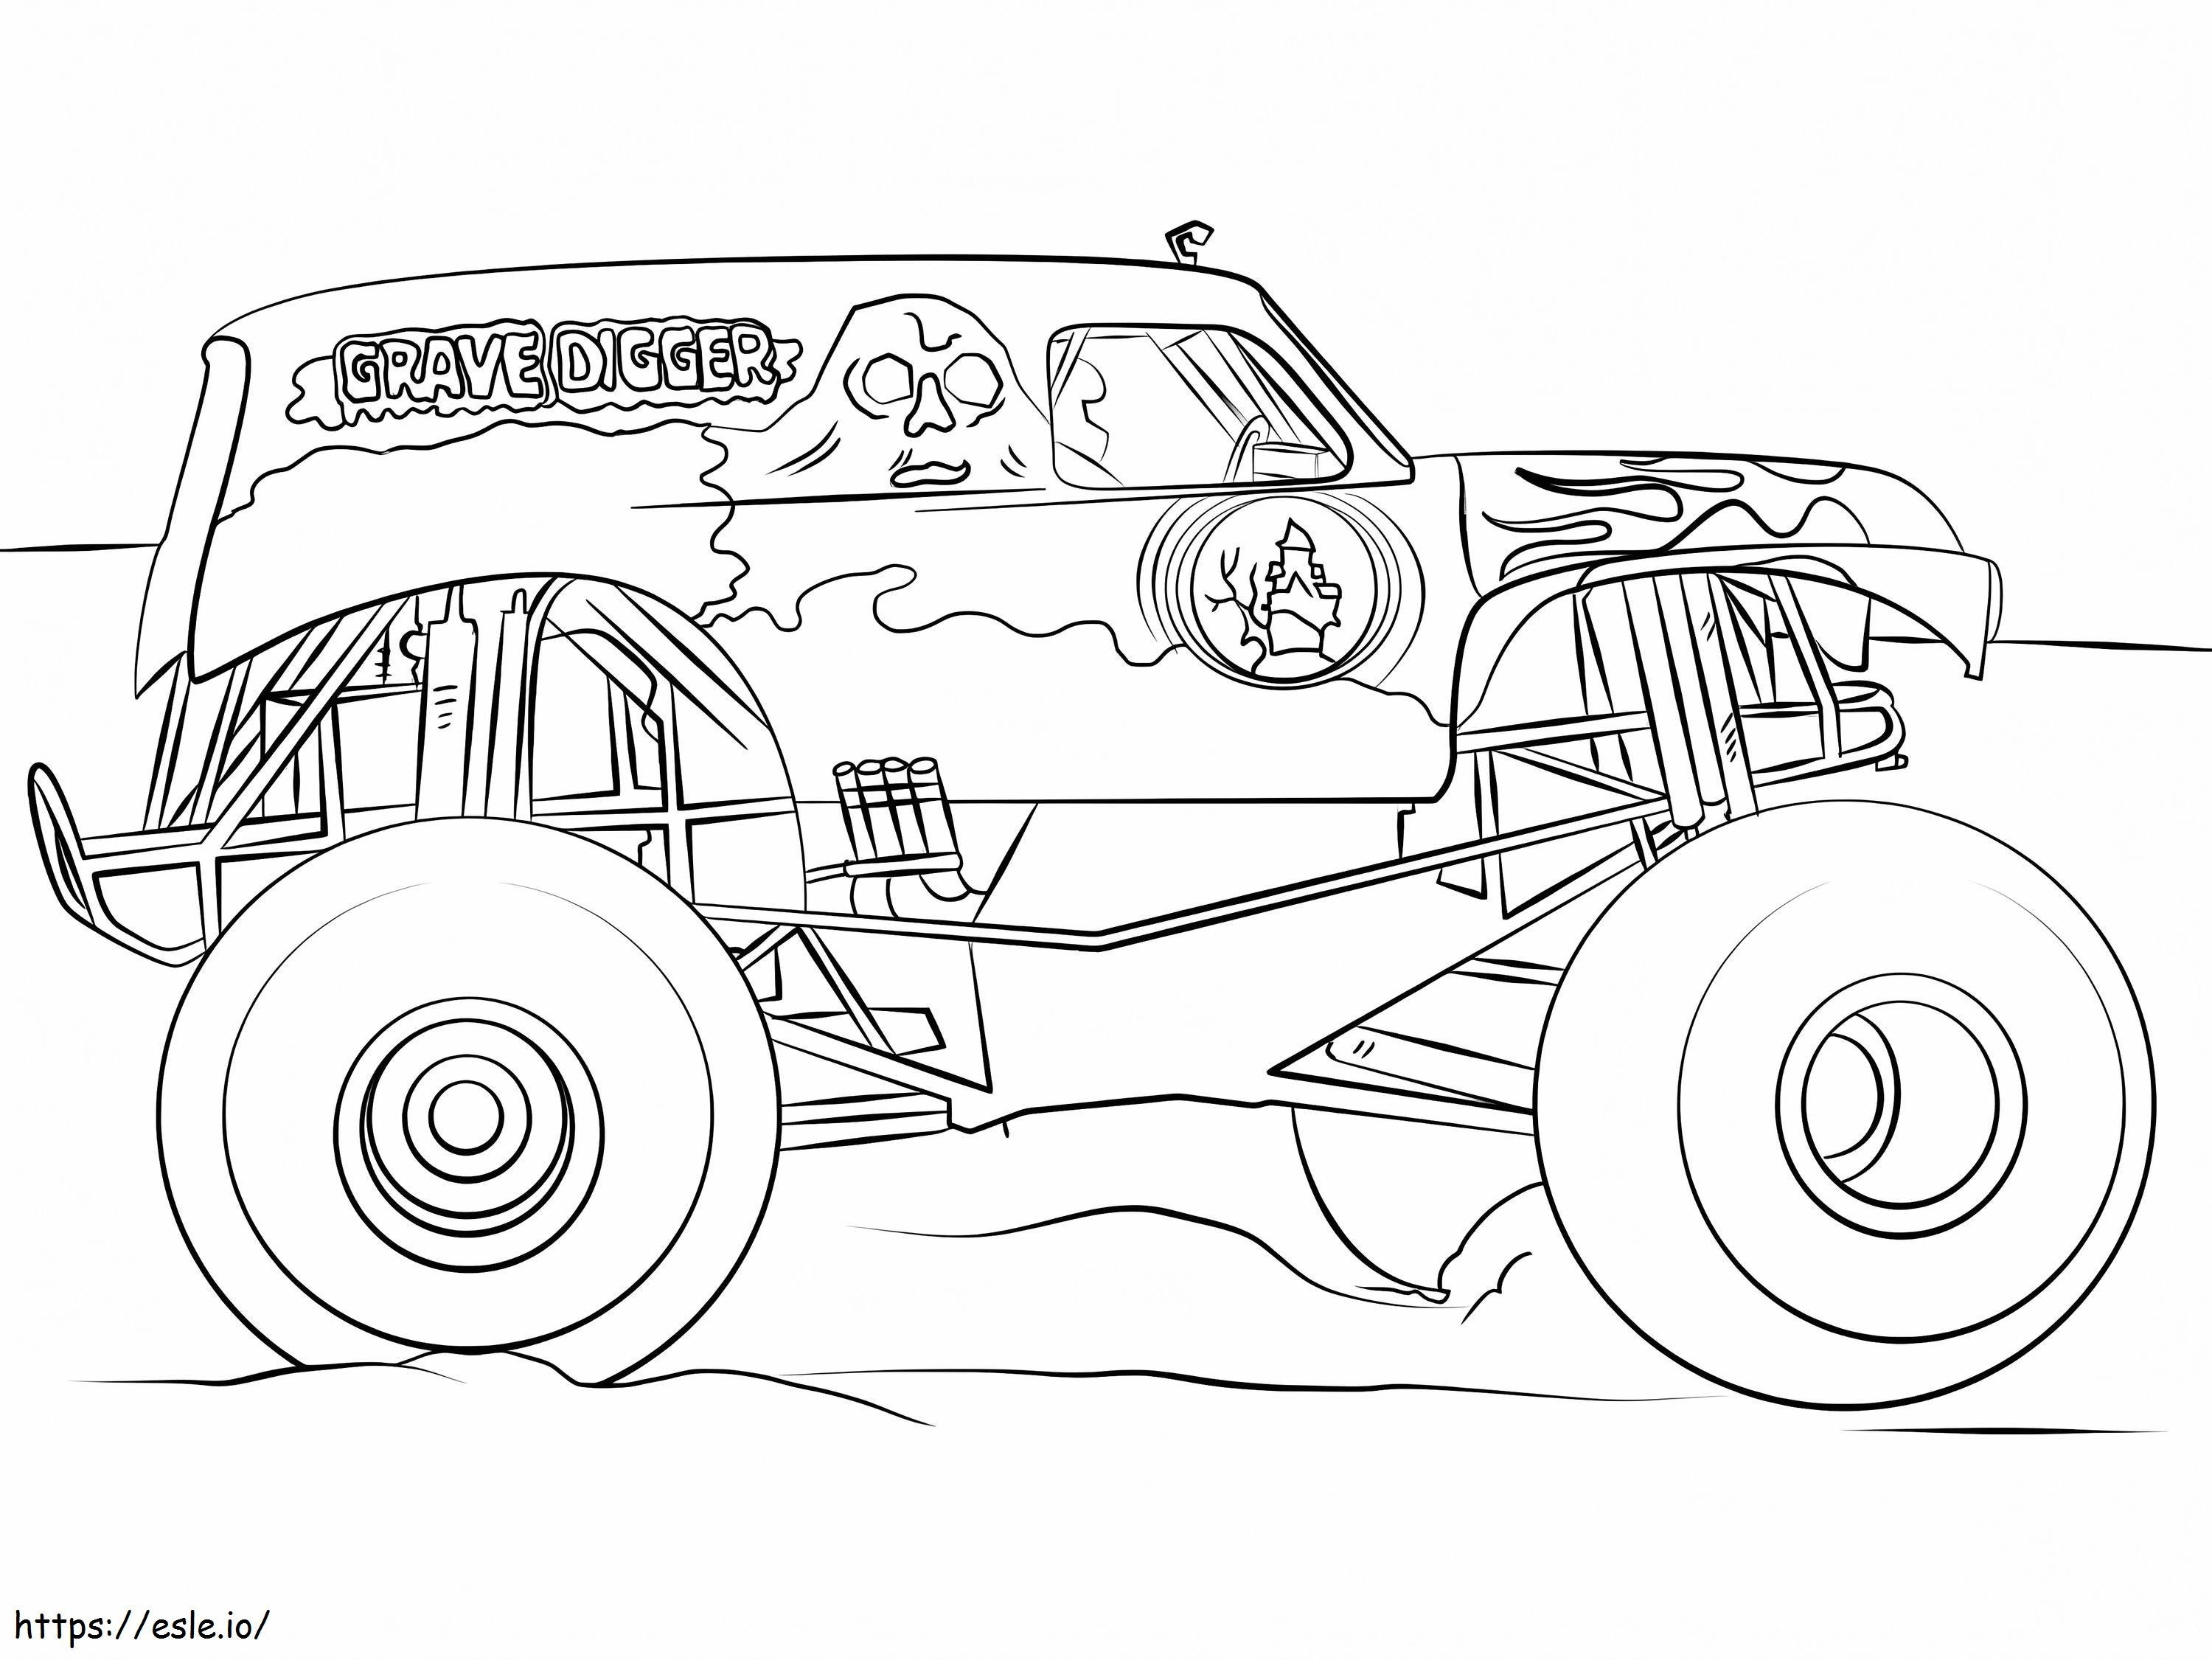 Gravedigger Monster Truck coloring page